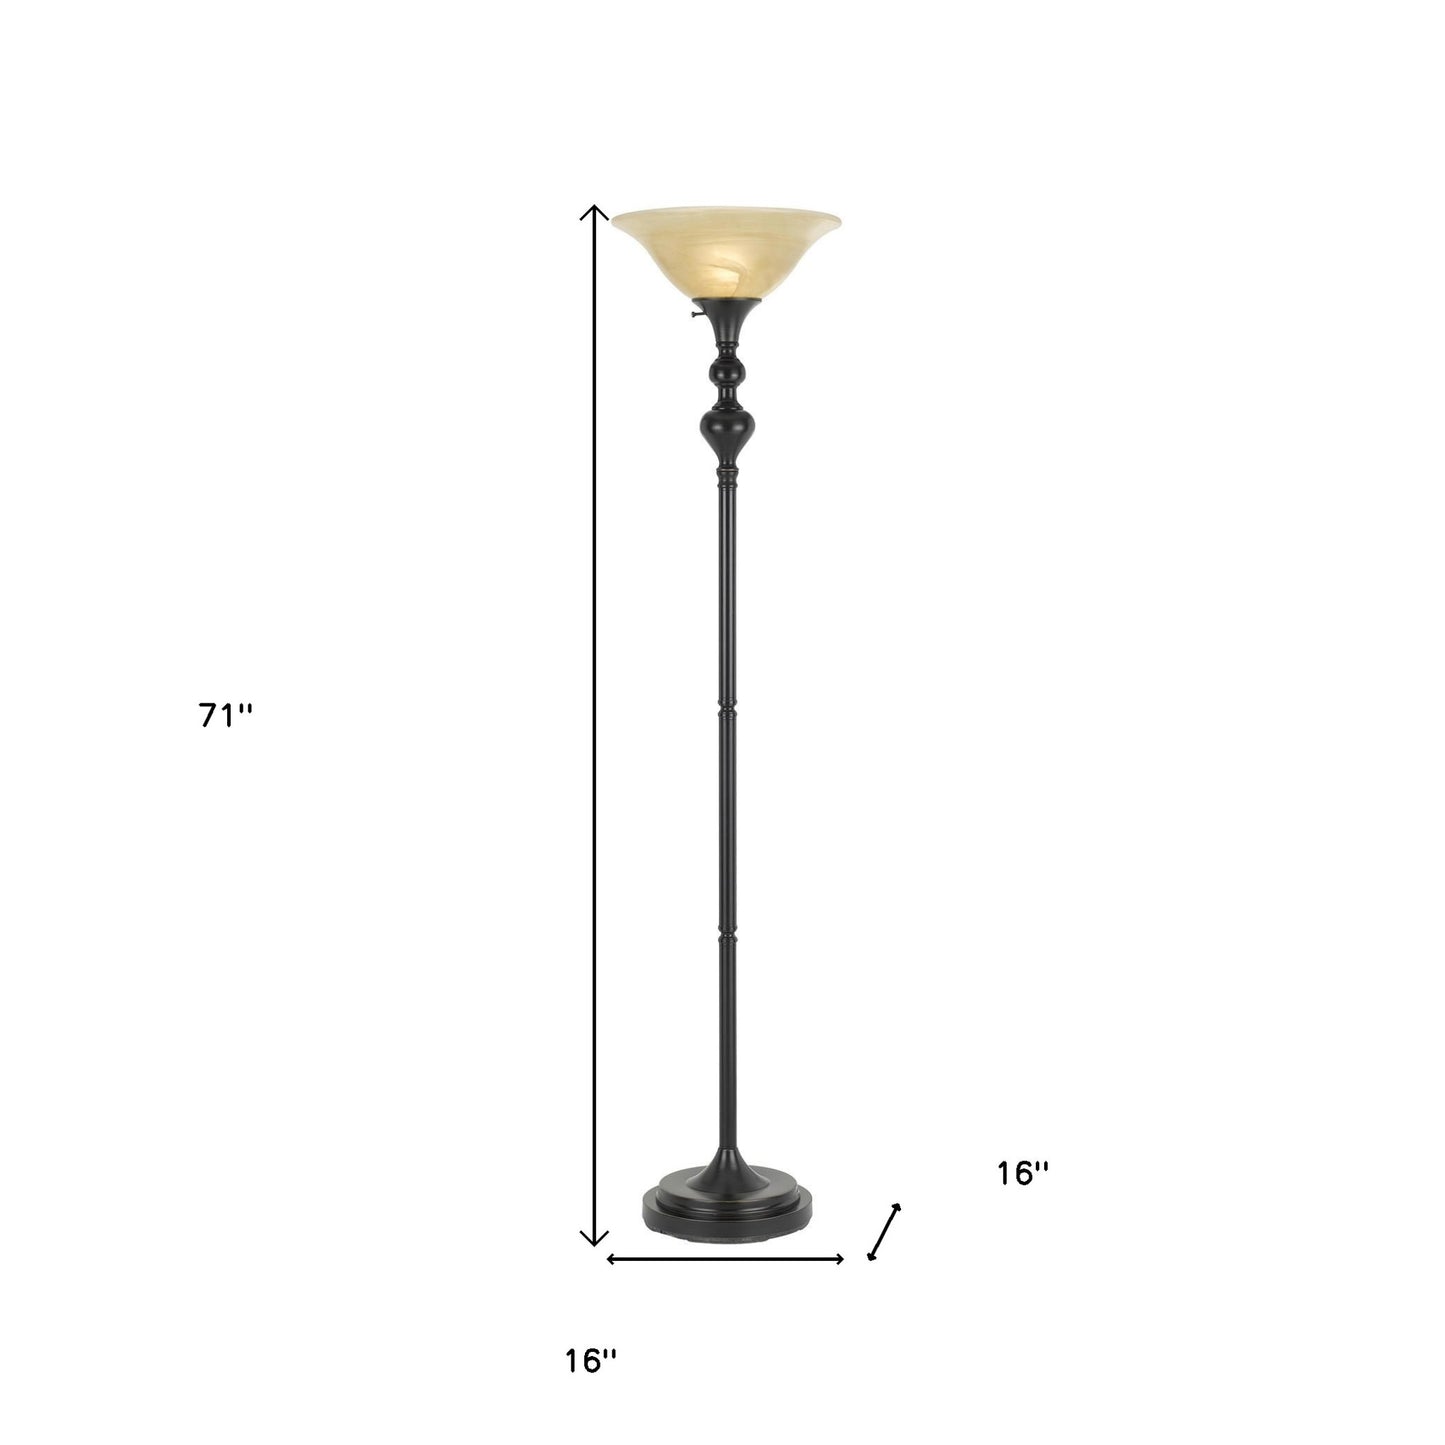 71" Bronze Torchiere Floor Lamp With Beige Frosted Glass Dome Shade